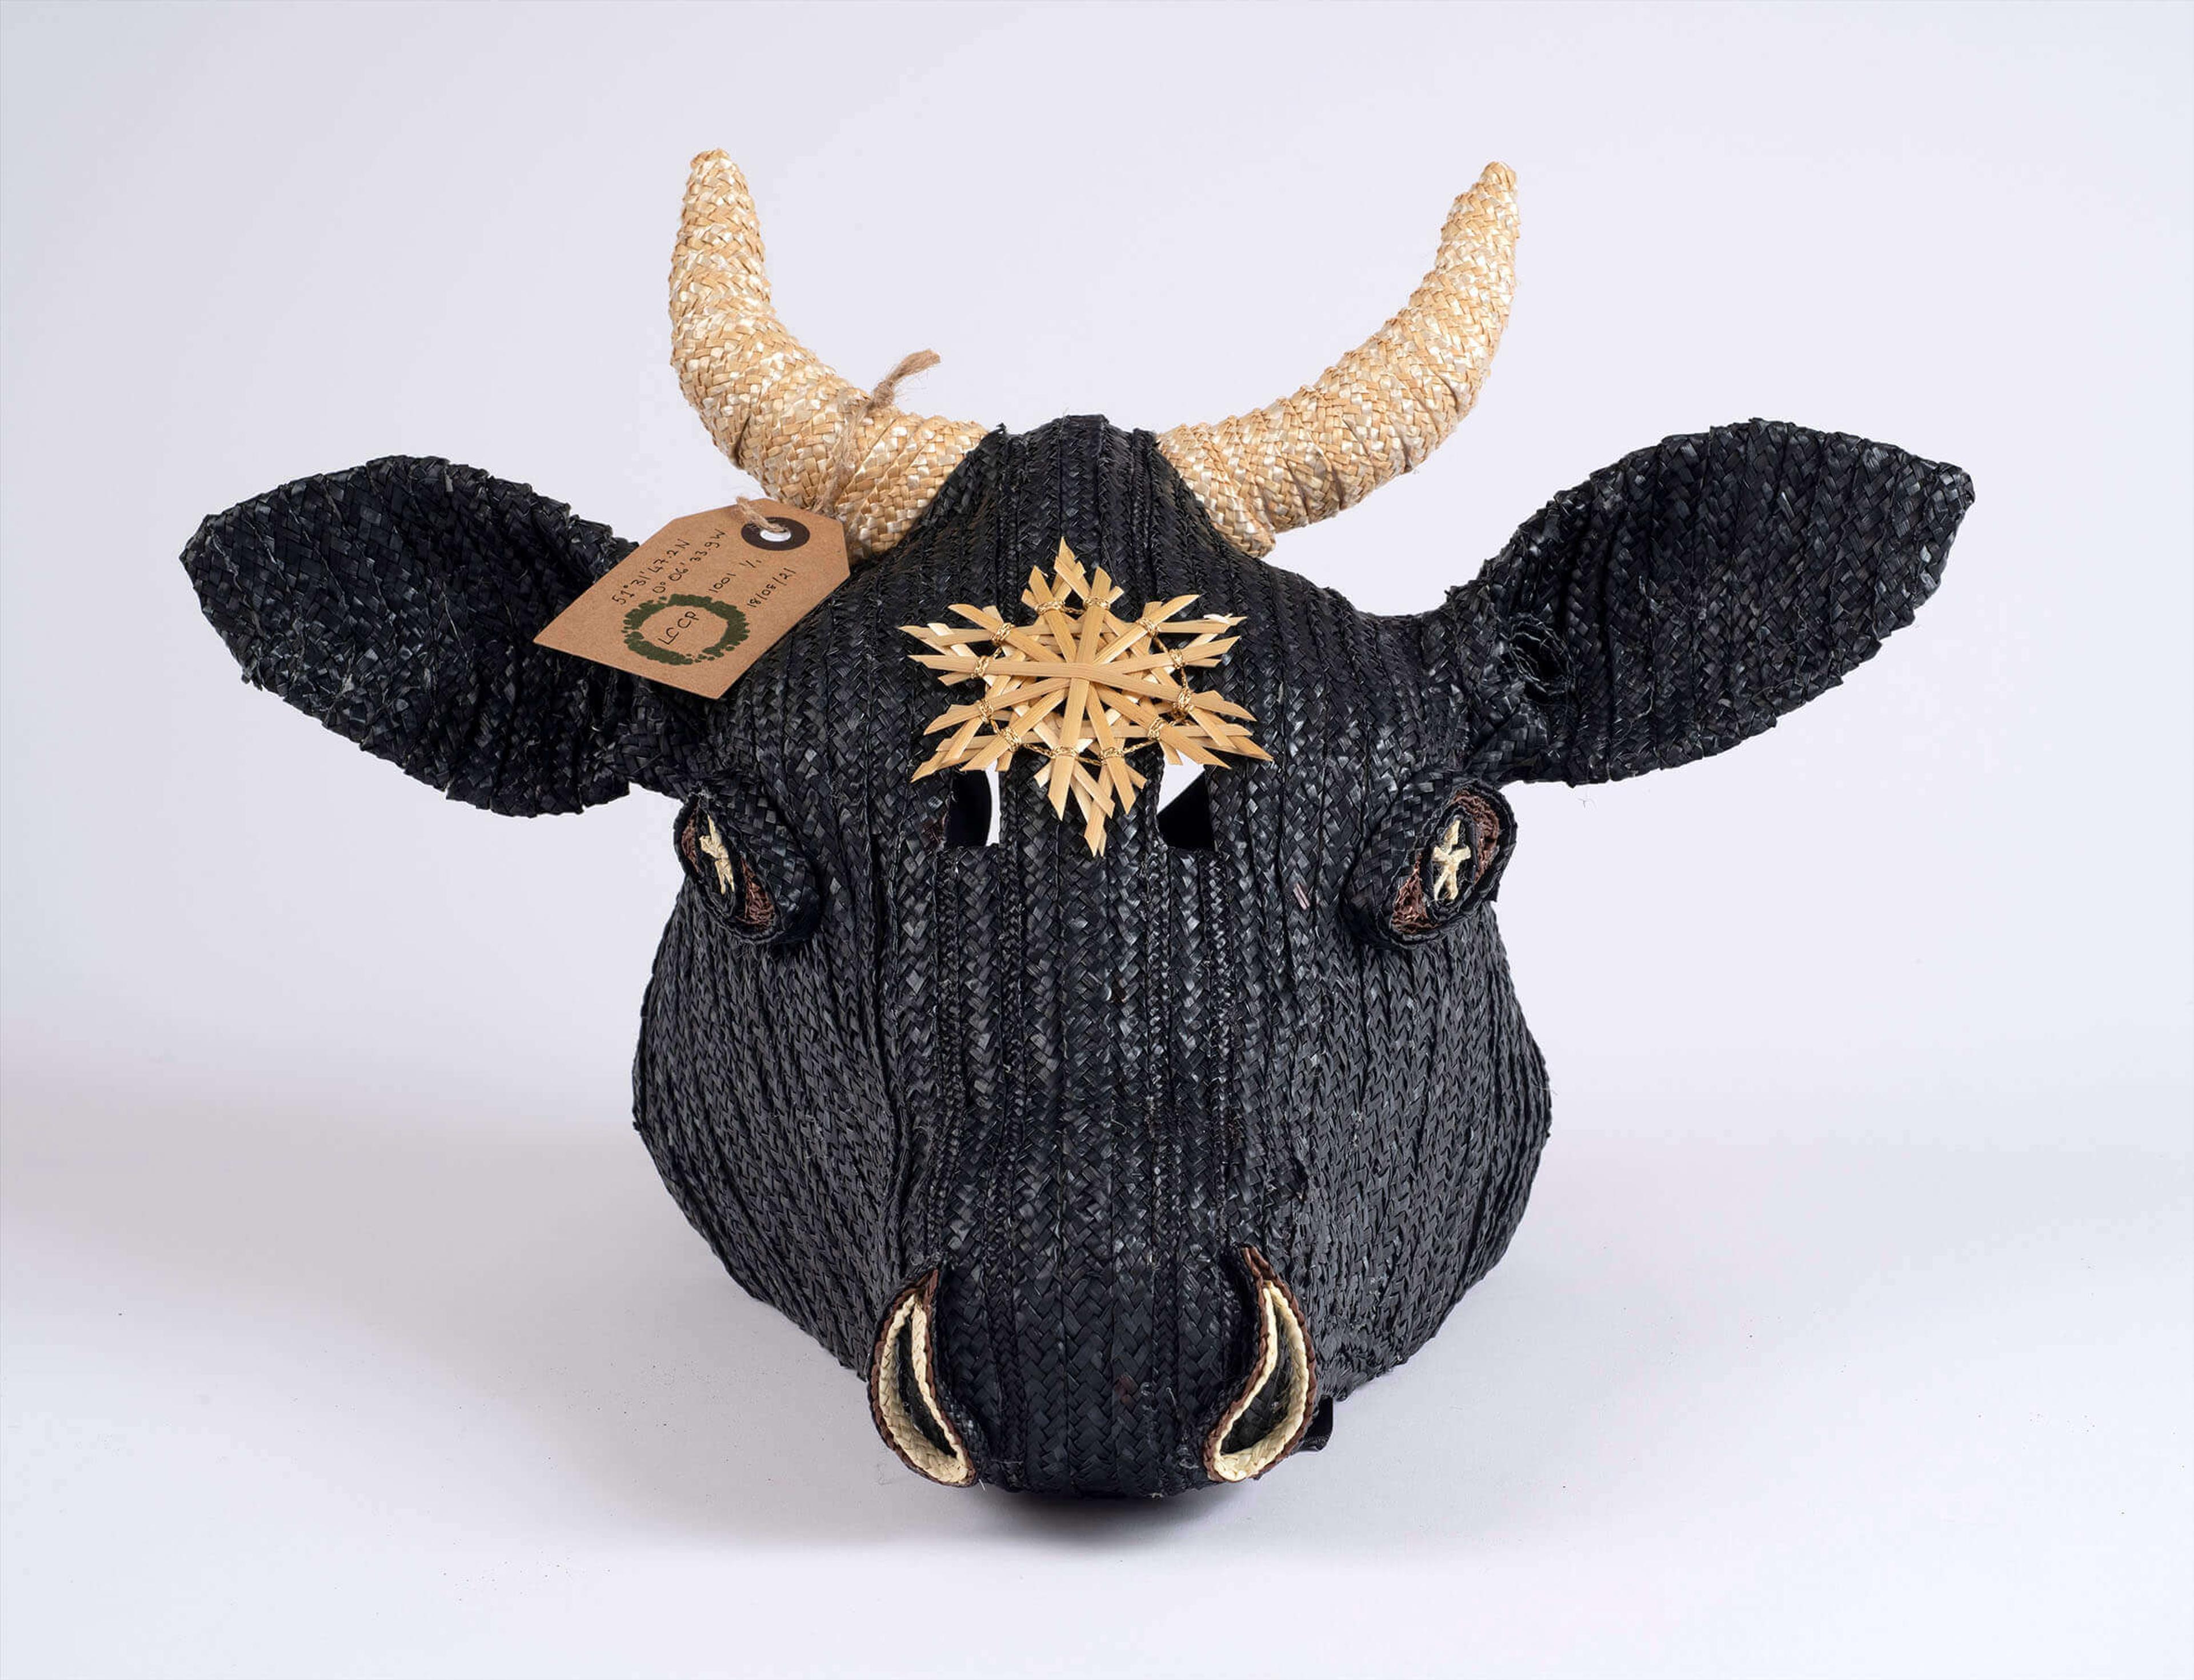 Black wicker cow's head with yellow wicker horns and straw star on the forehead